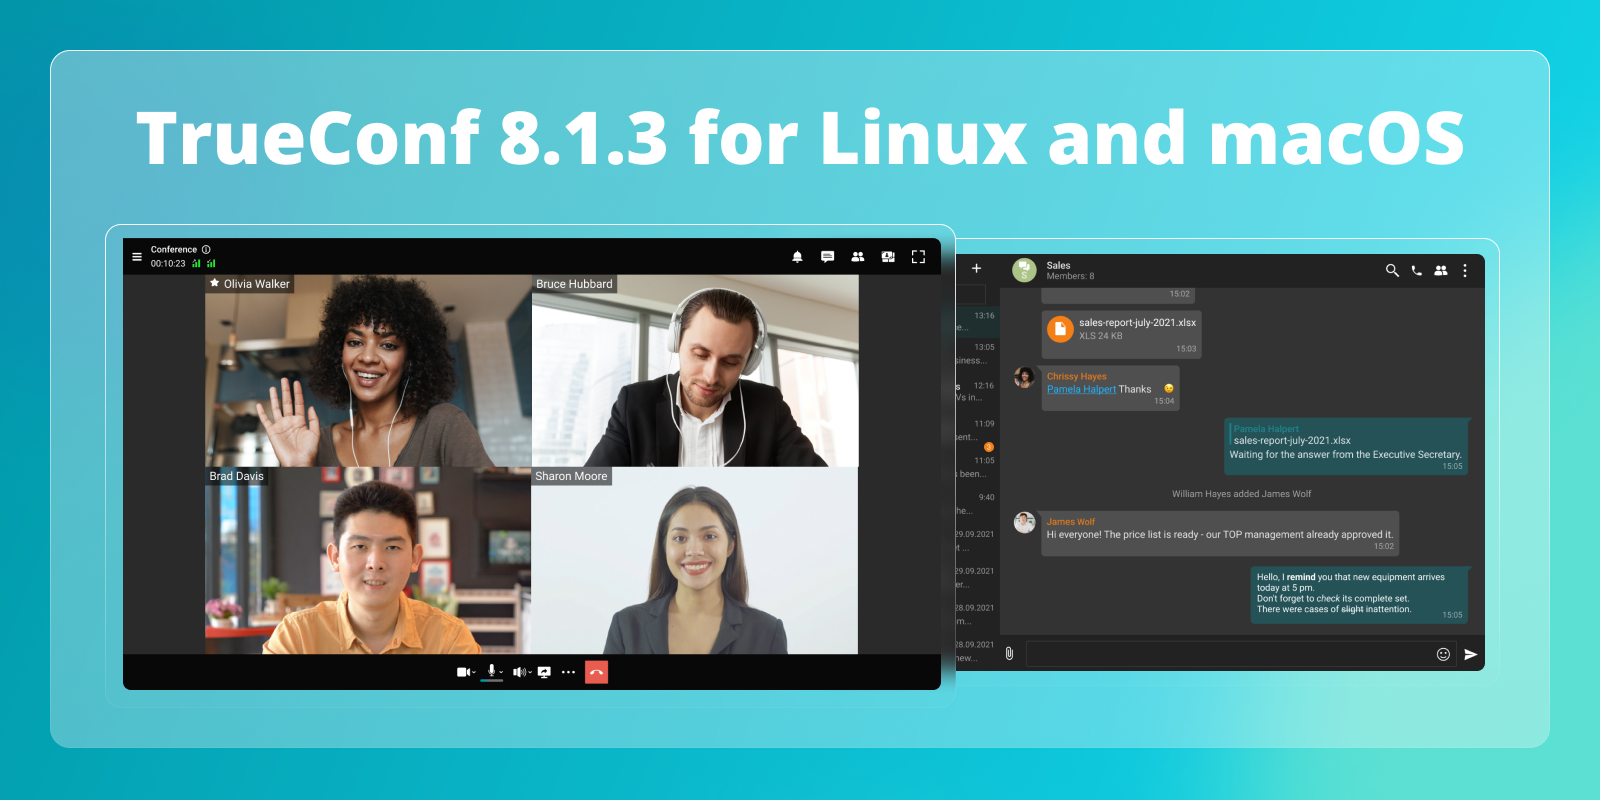 TrueConf 8.1.3 for Linux and macOS: Performance and Usability Updates 8